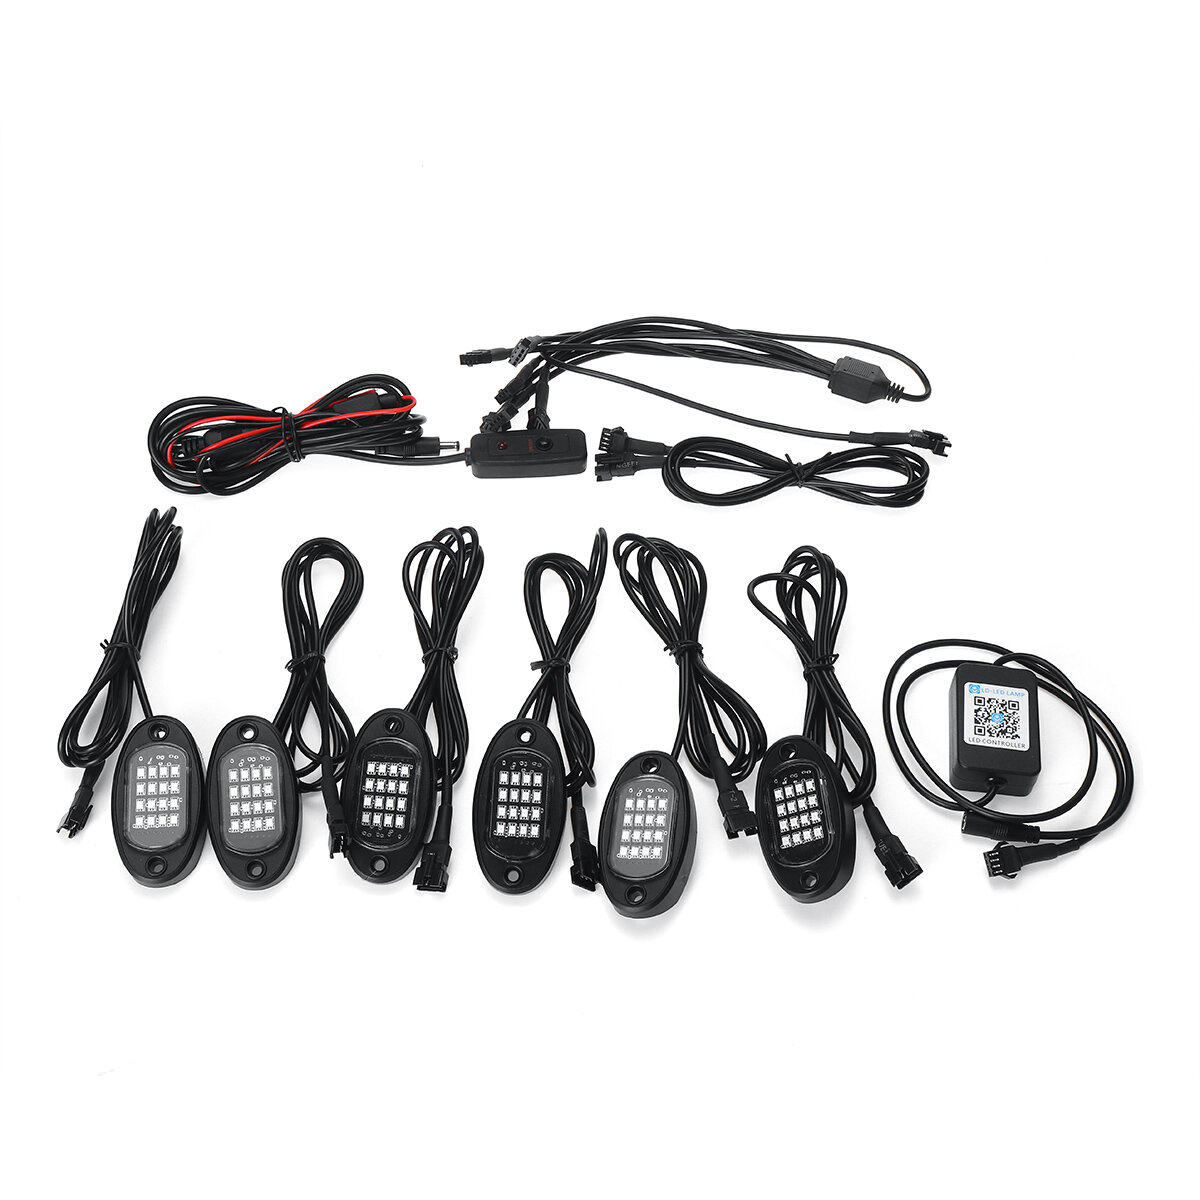 6 stks LED RGB Off-road Rock Light Underbody Lamp bluetooth Controle Voor Jeep Truck Motorboot